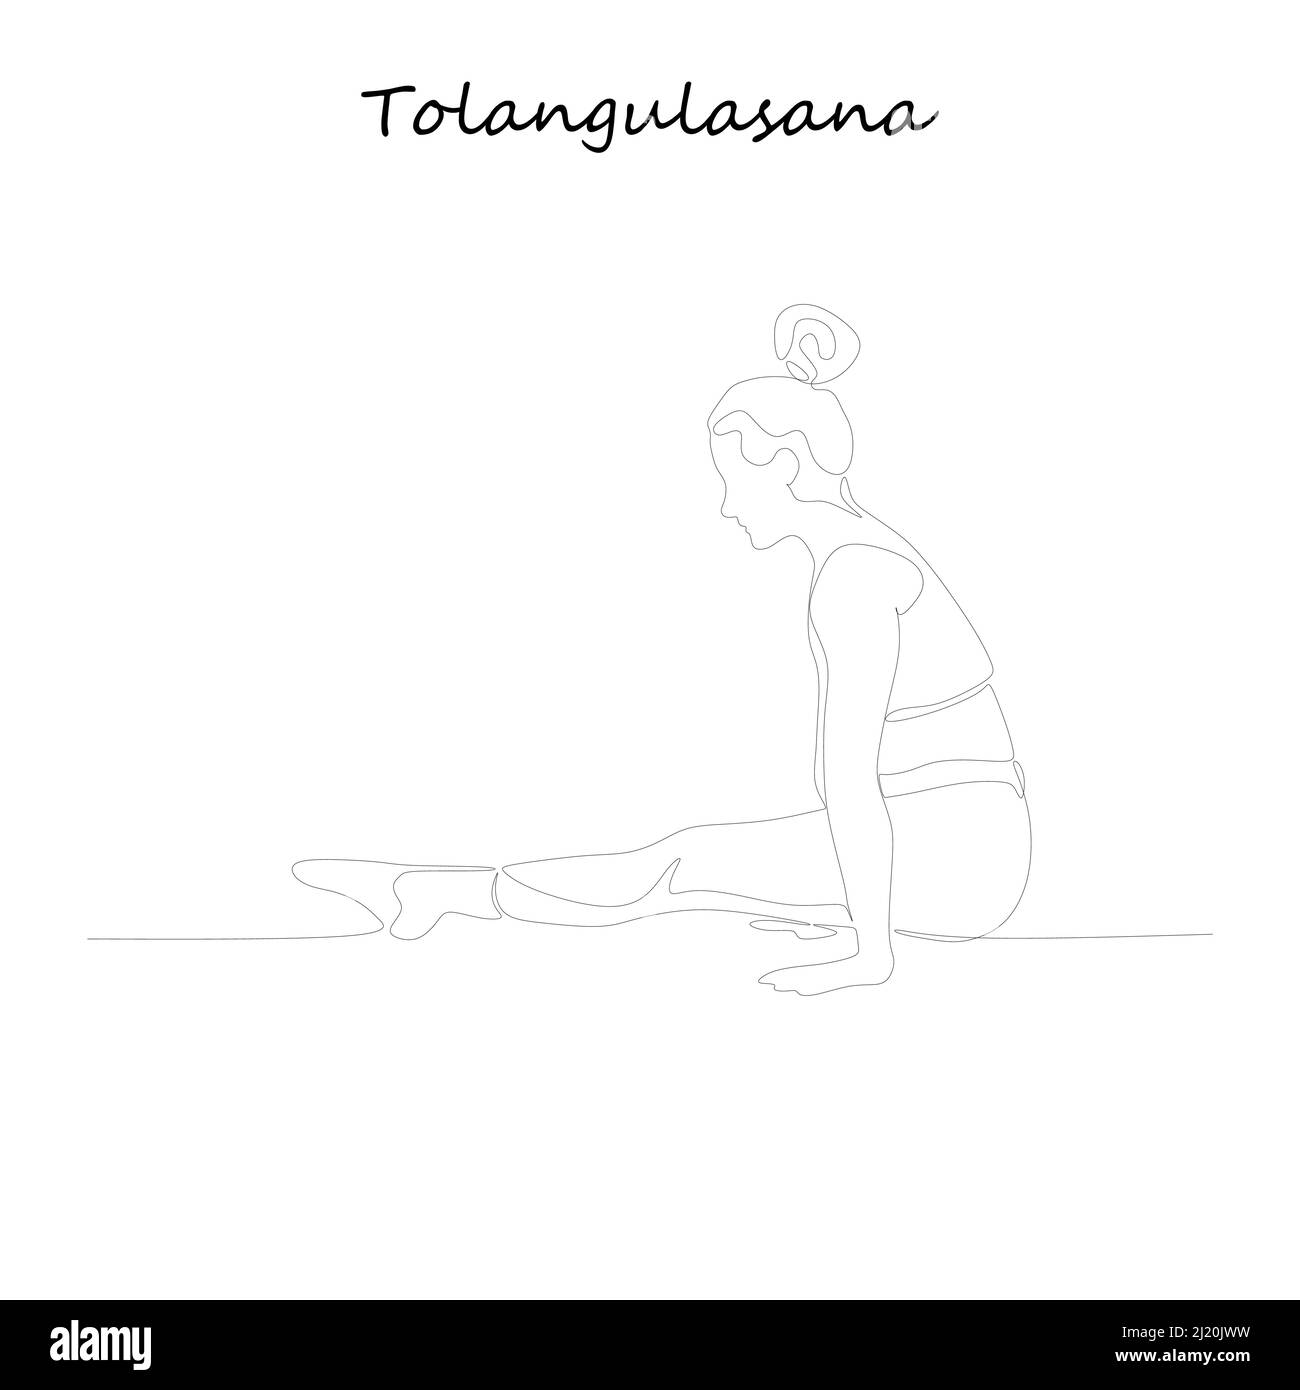 Continuous line drawing. Young woman making yoga exercise, silhouette picture. Oneline drawn black and white illustration. Tolangulasana. Stock Vector